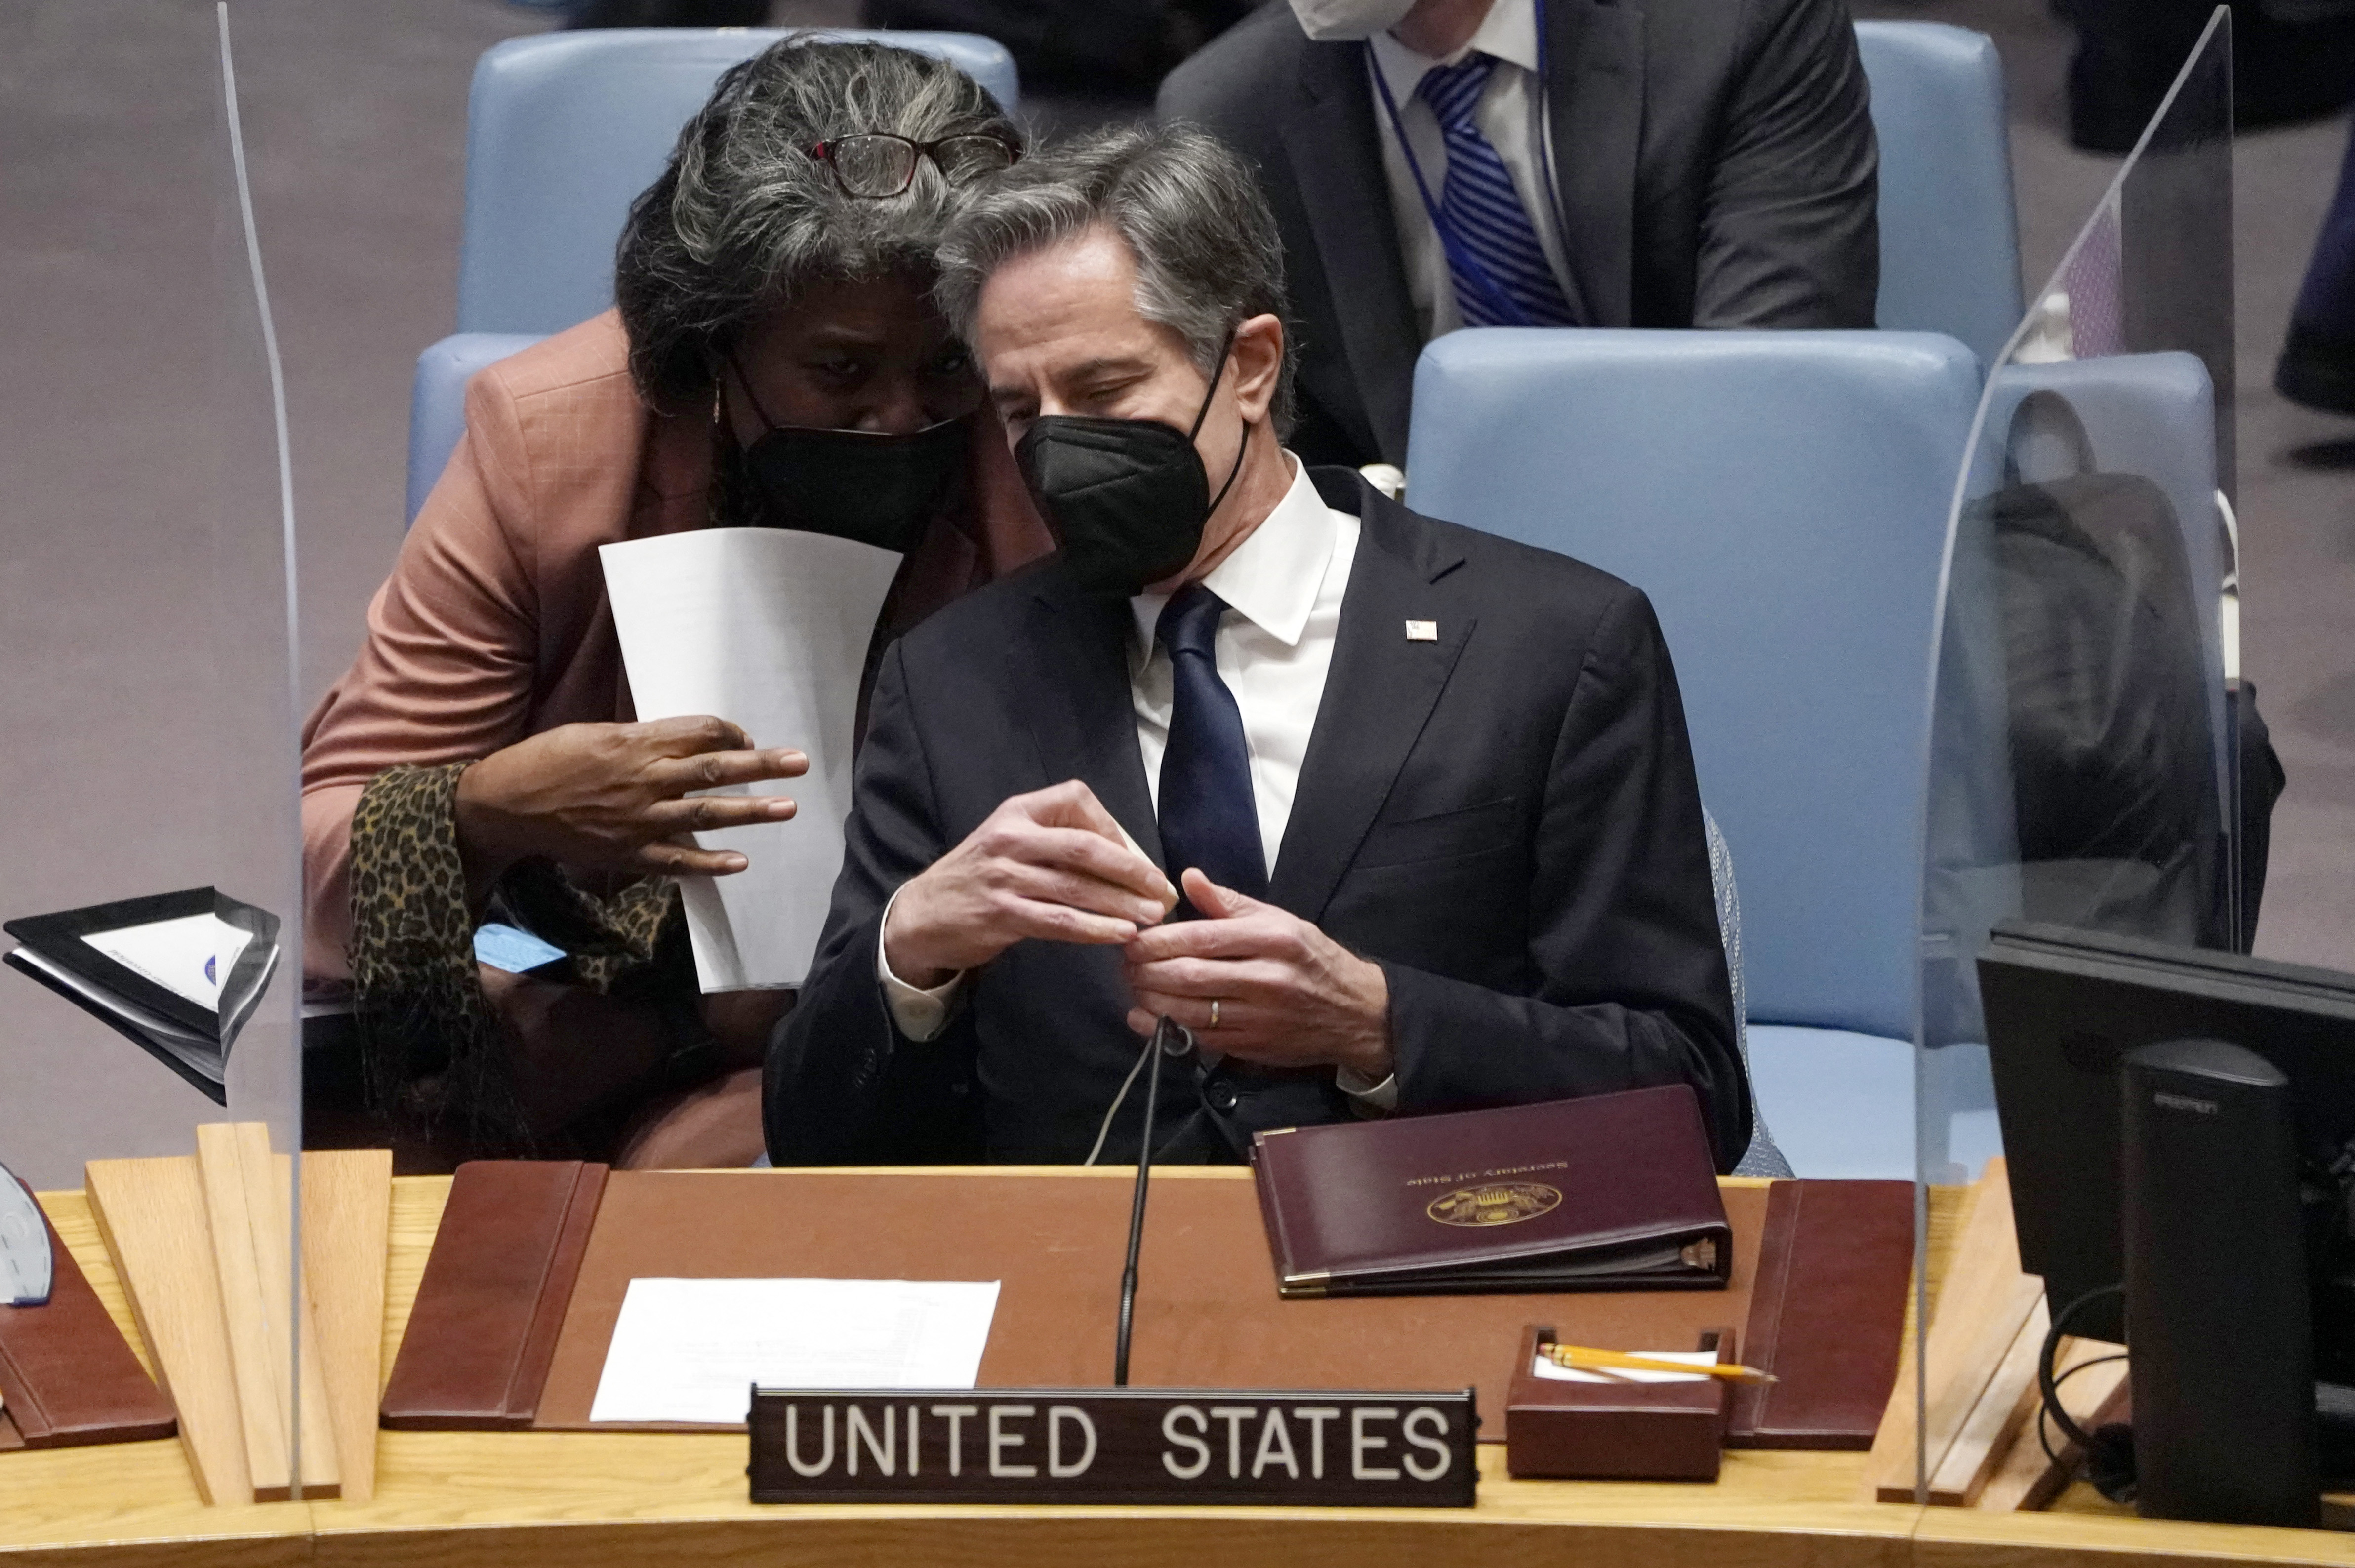 US Secretary of State Antony Blinken and US Ambassador to the United Nations Linda Thomas-Greenfield at the United Nations in New York on February 17.